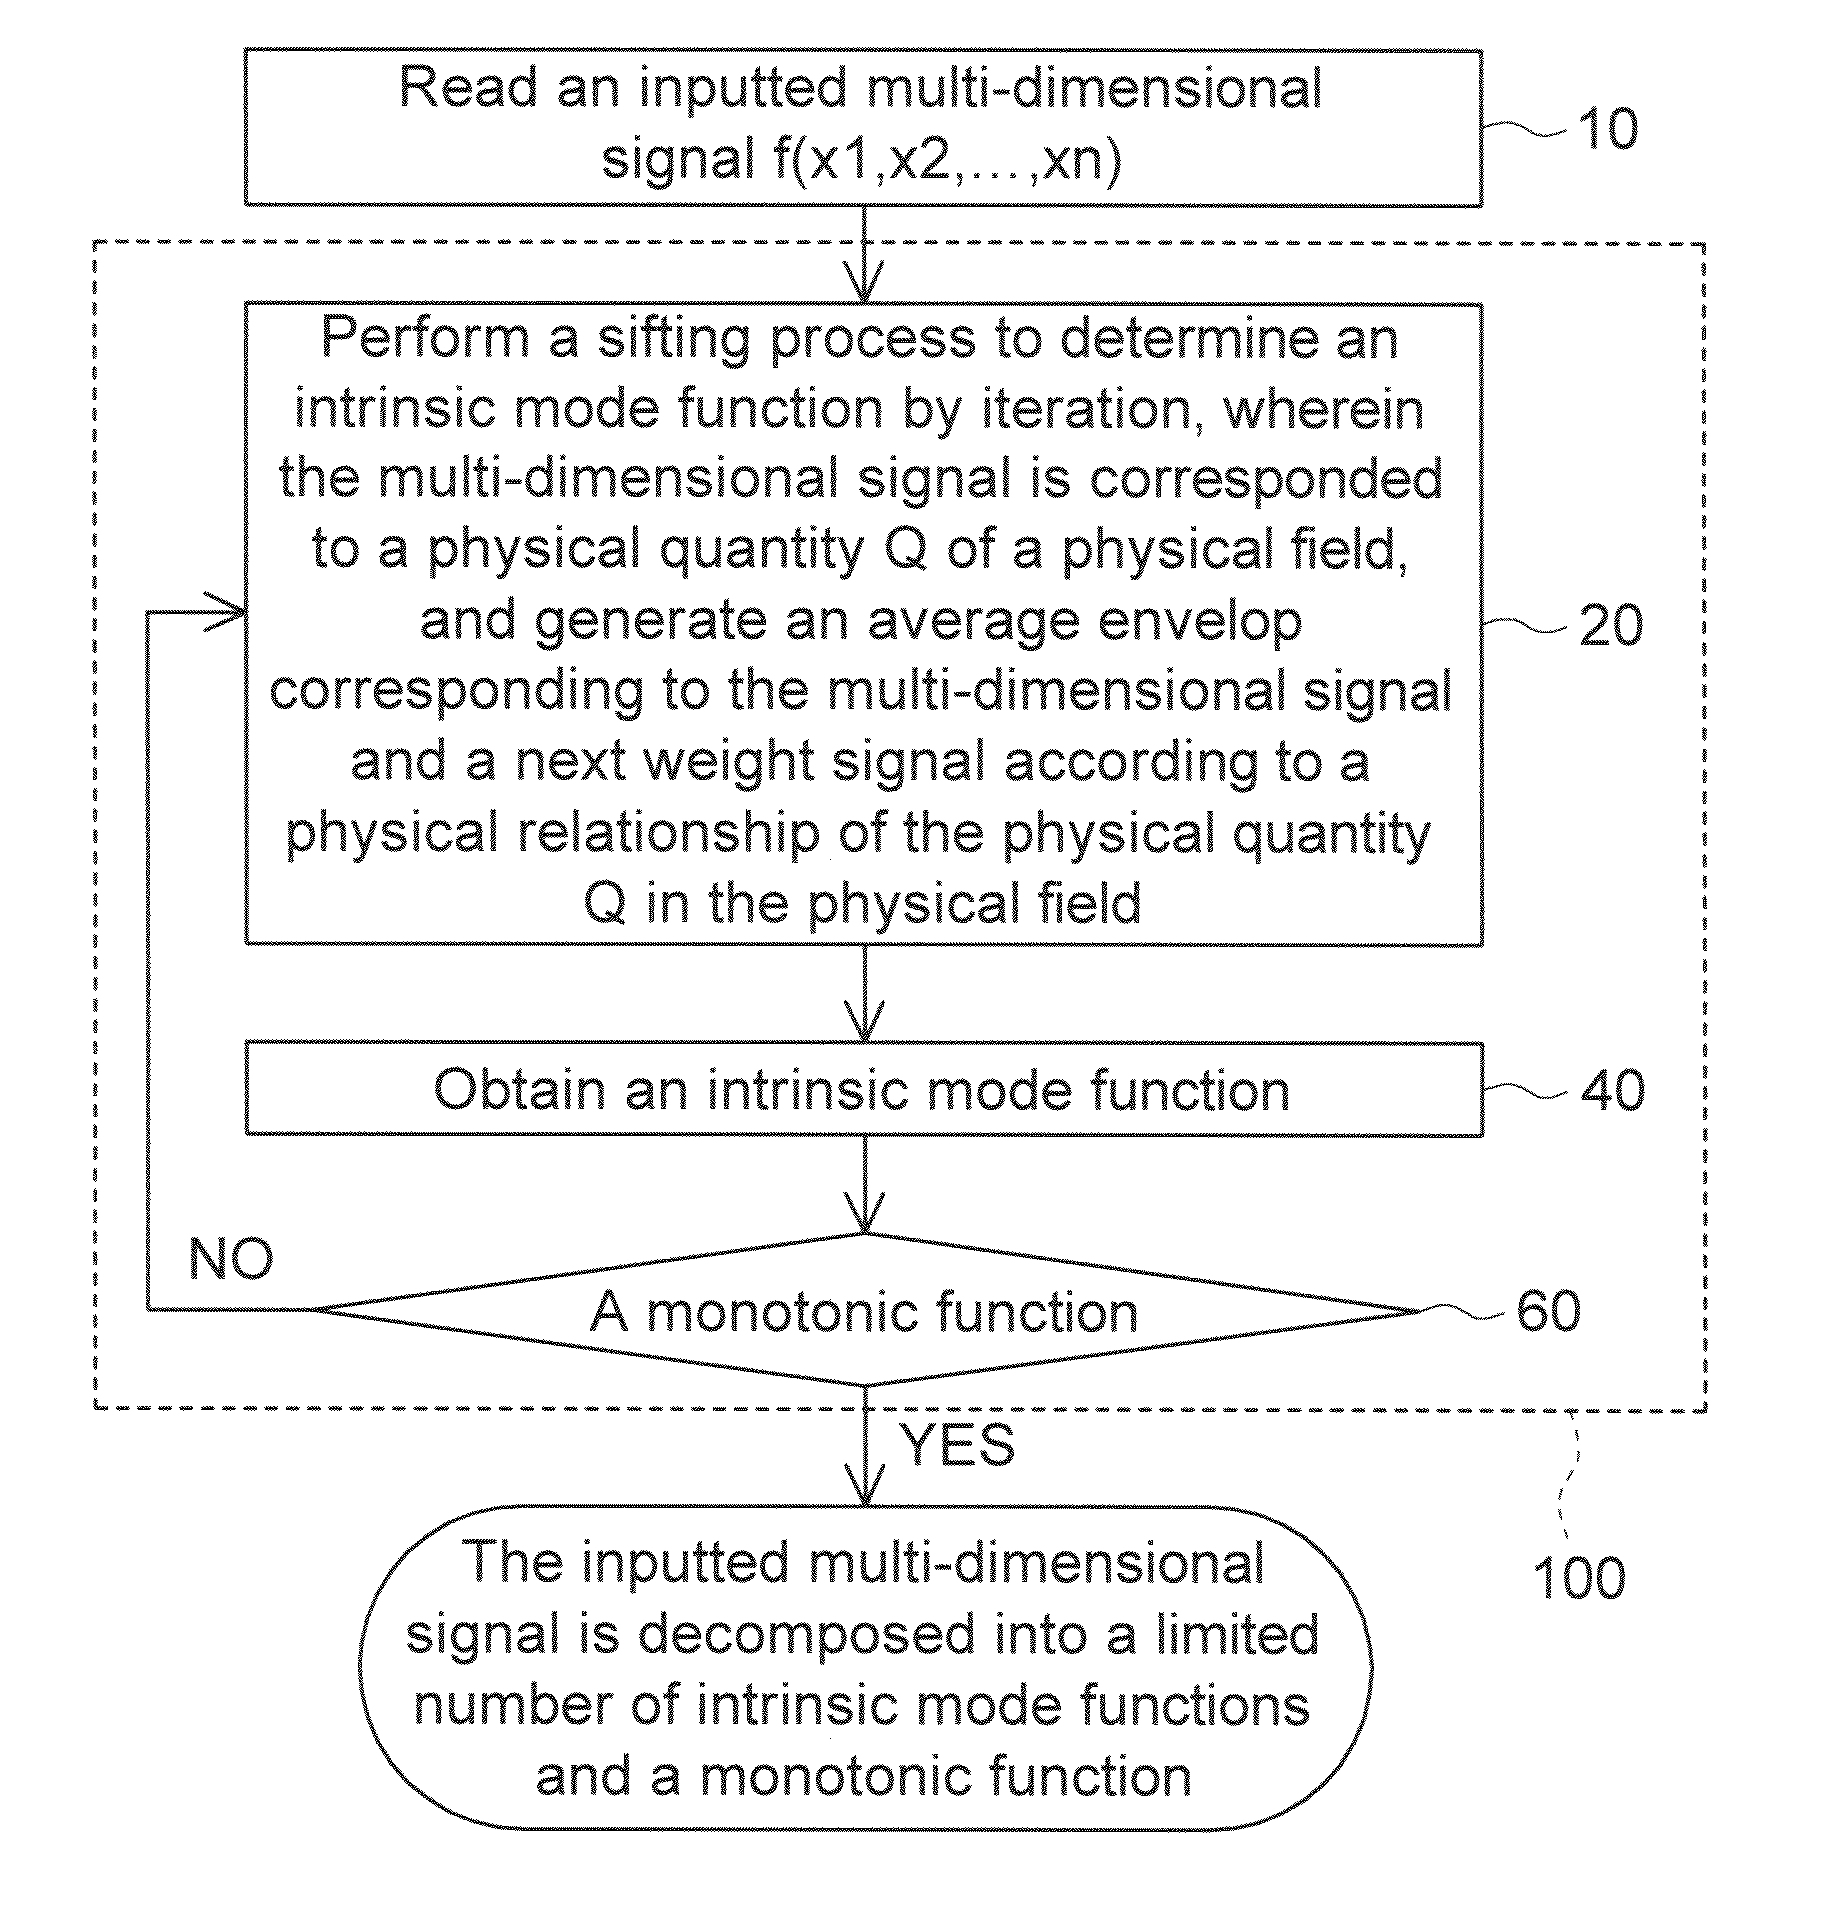 Multi-dimensional empirical mode decomposition (EMD) method for image texture analysis